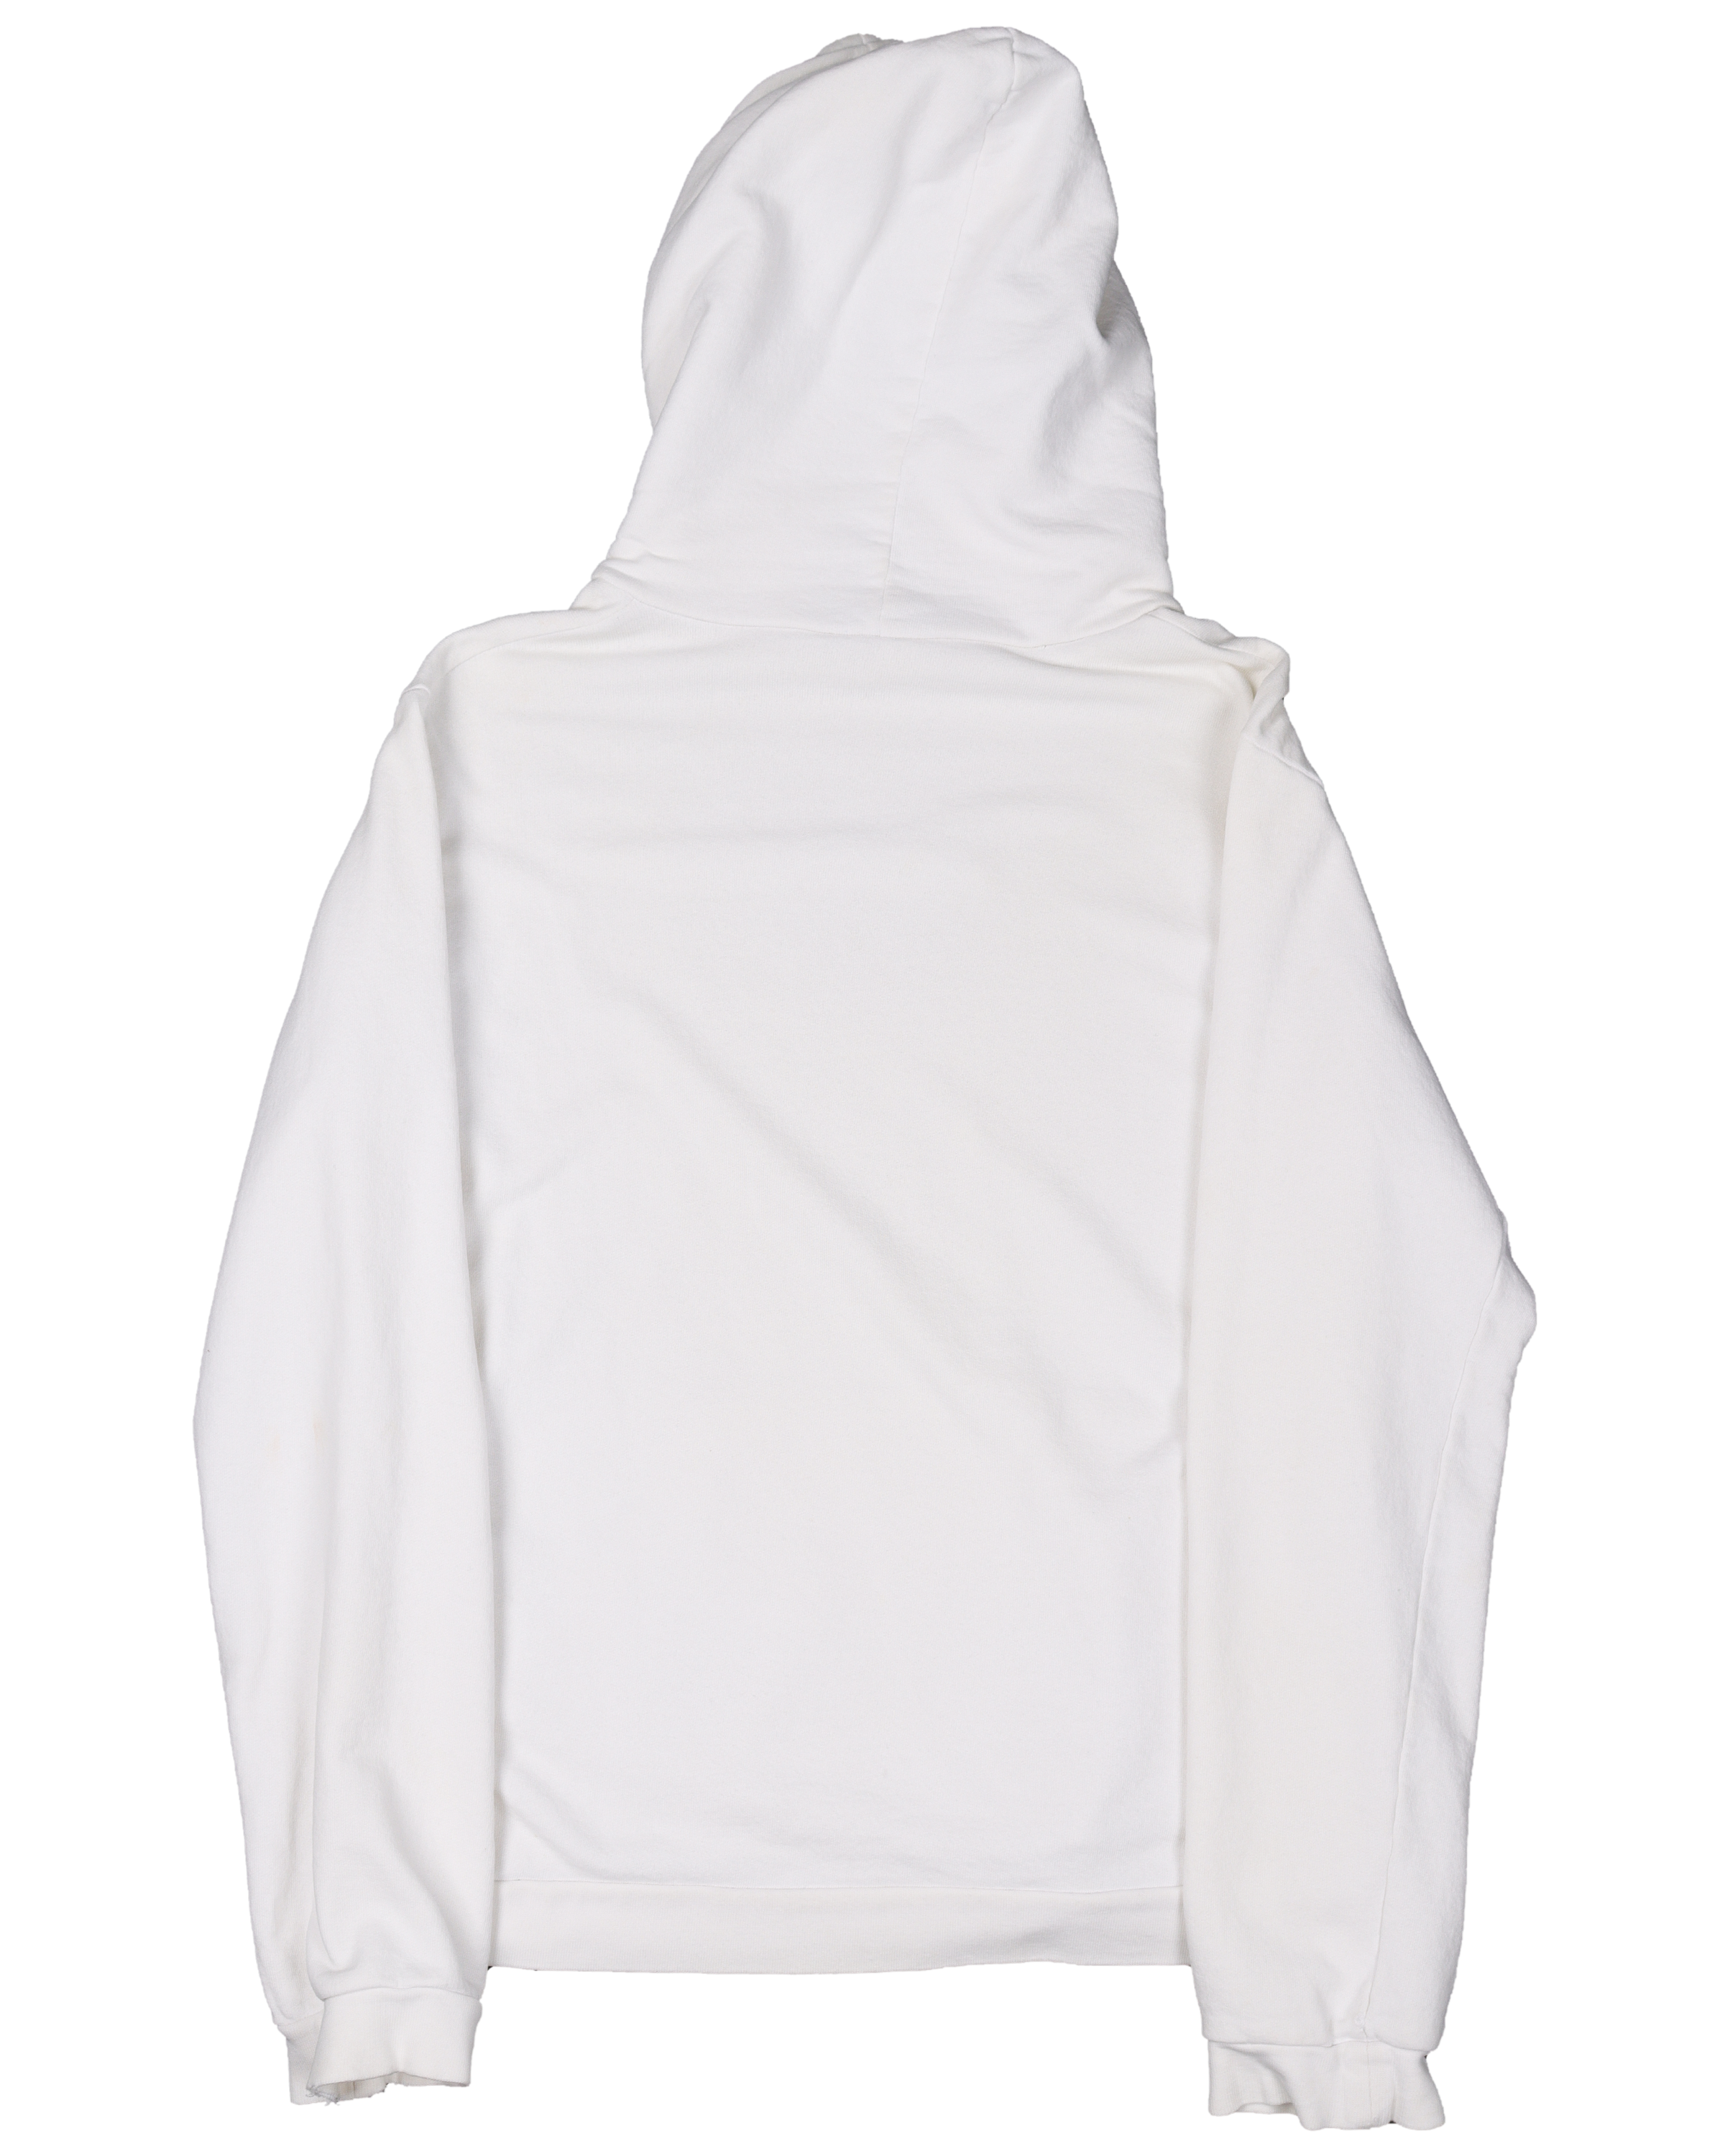 SS02 Silence And Secrecy Butcher Knife Hoodie